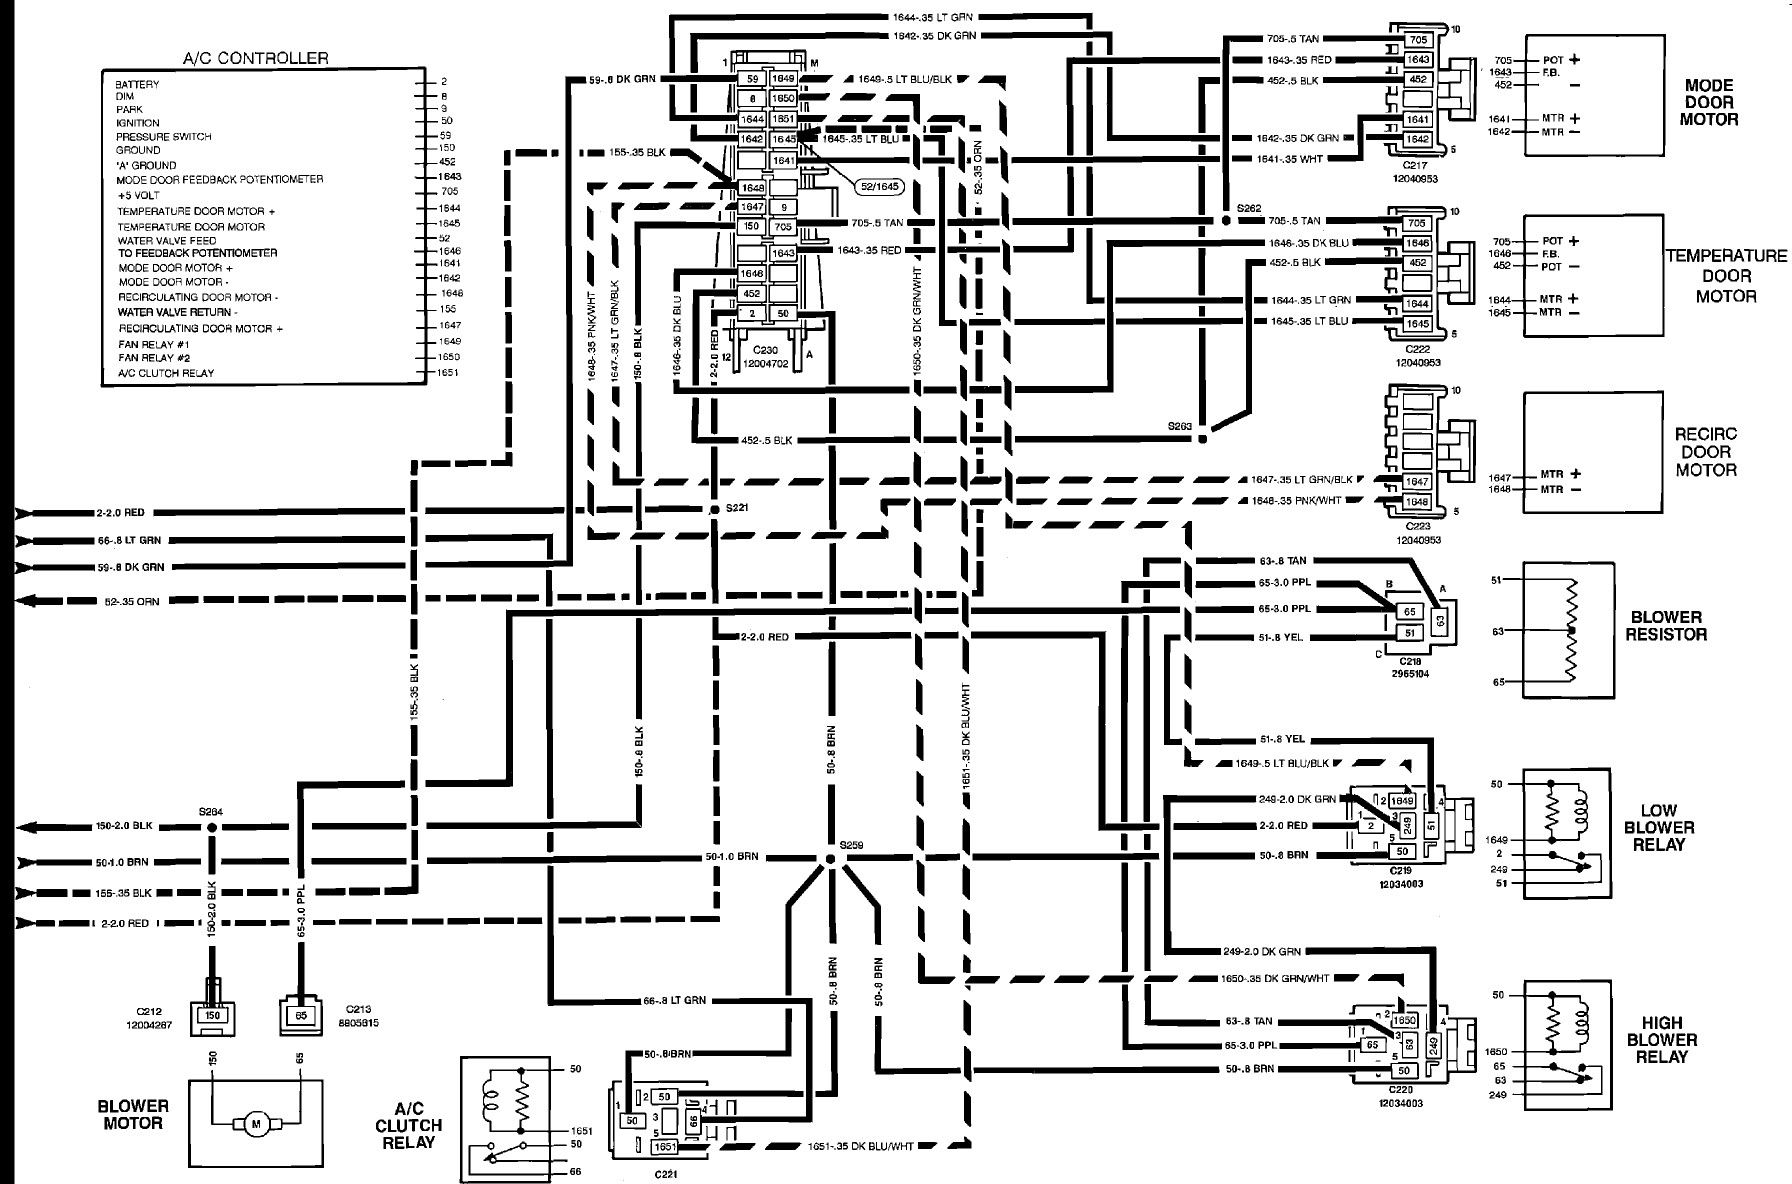 1998 Chevy S10 Wiring Diagram - 98 Chevy S10 Fuel Wiring Wiring Diagram